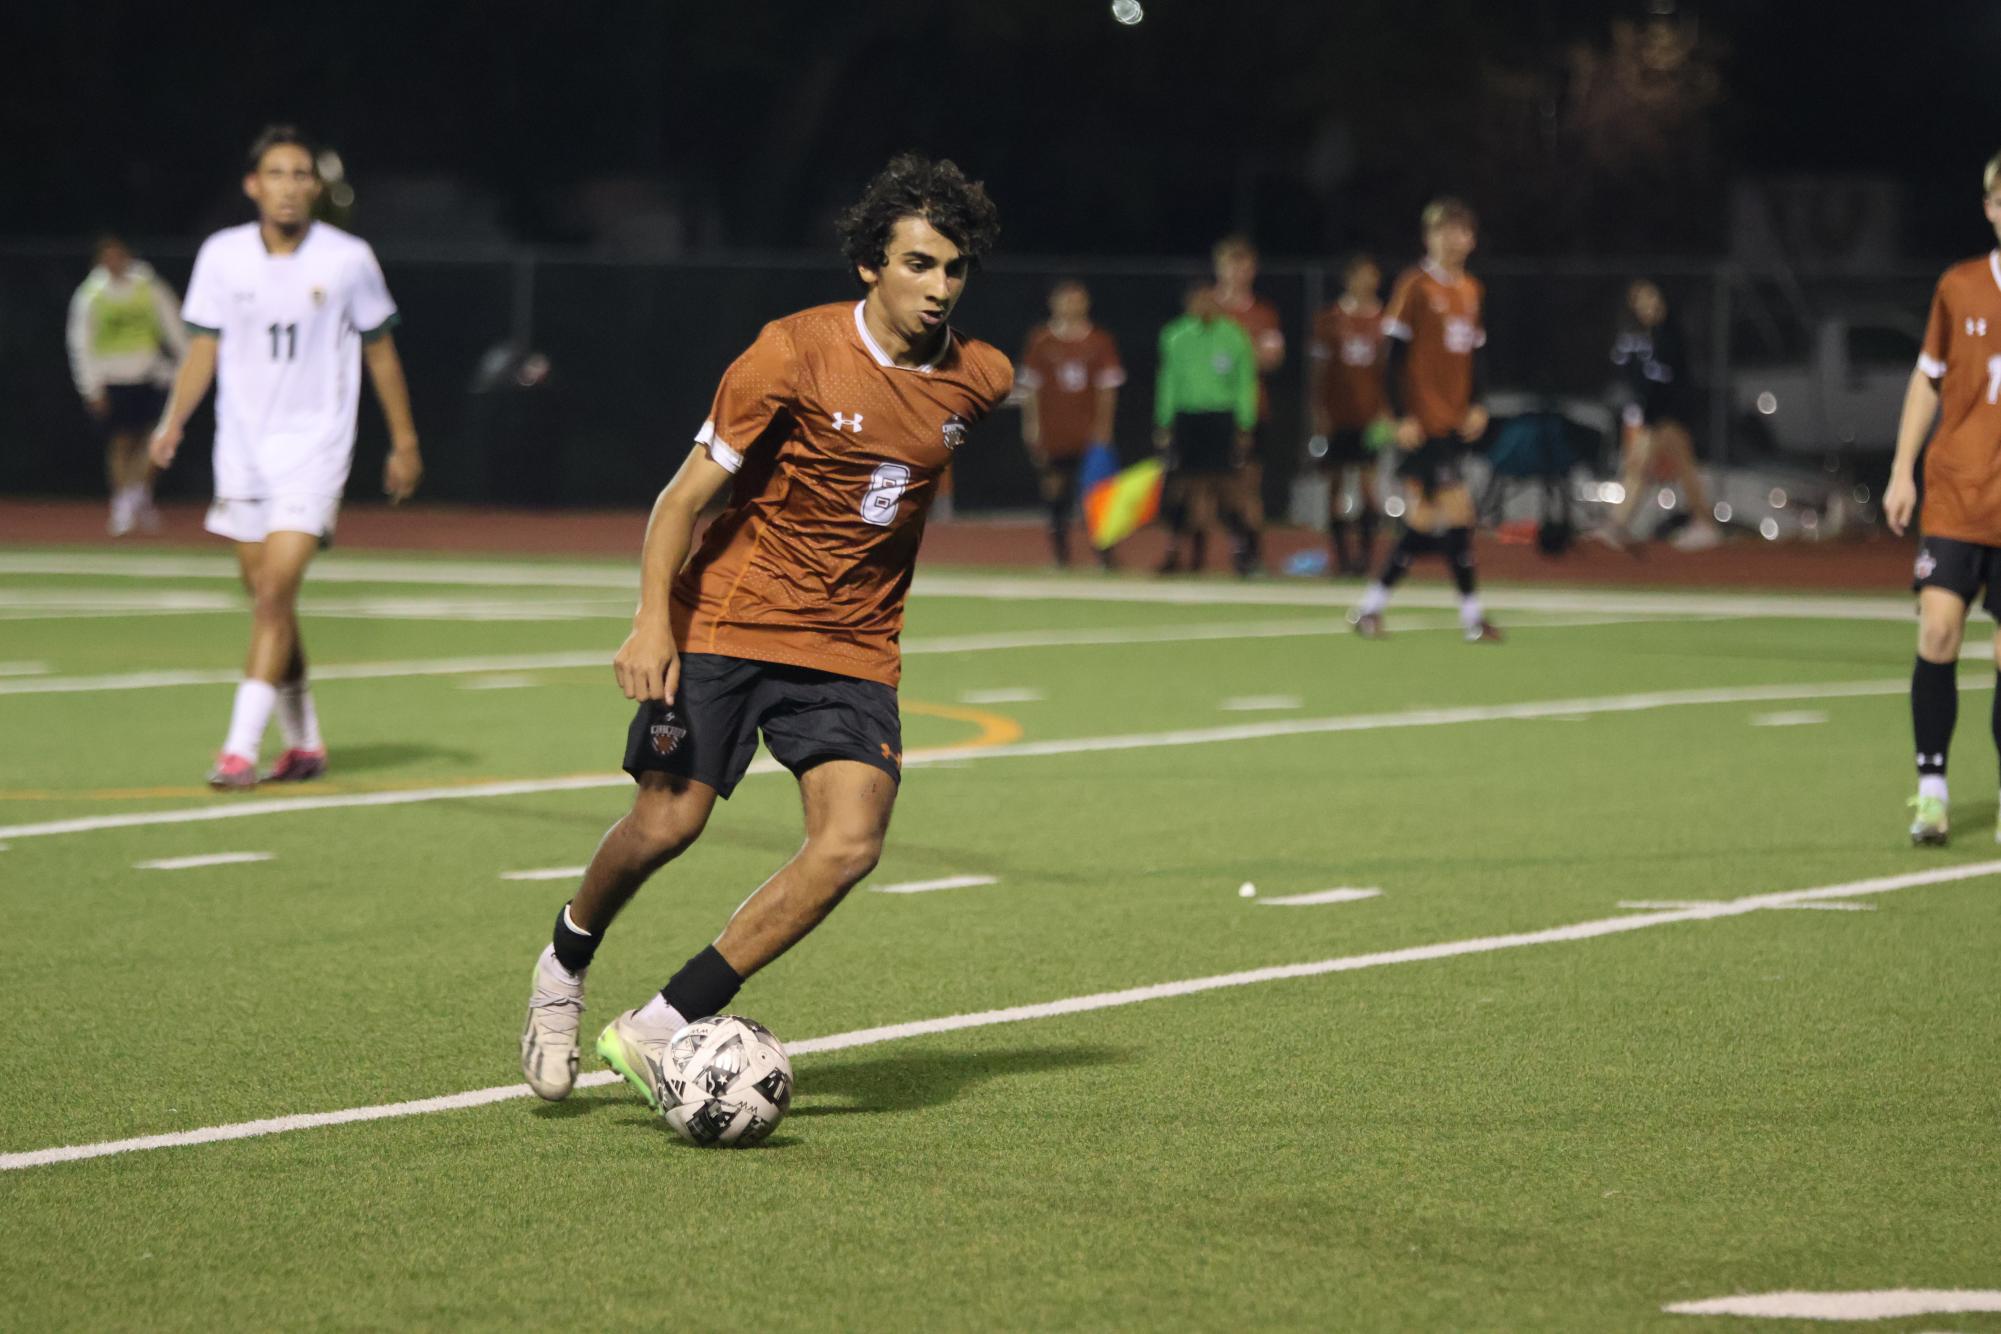 Varsity Boys Soccer: McNeil Ends Unbeaten Streak with 1-0 Defeat, Key Players and Match Details